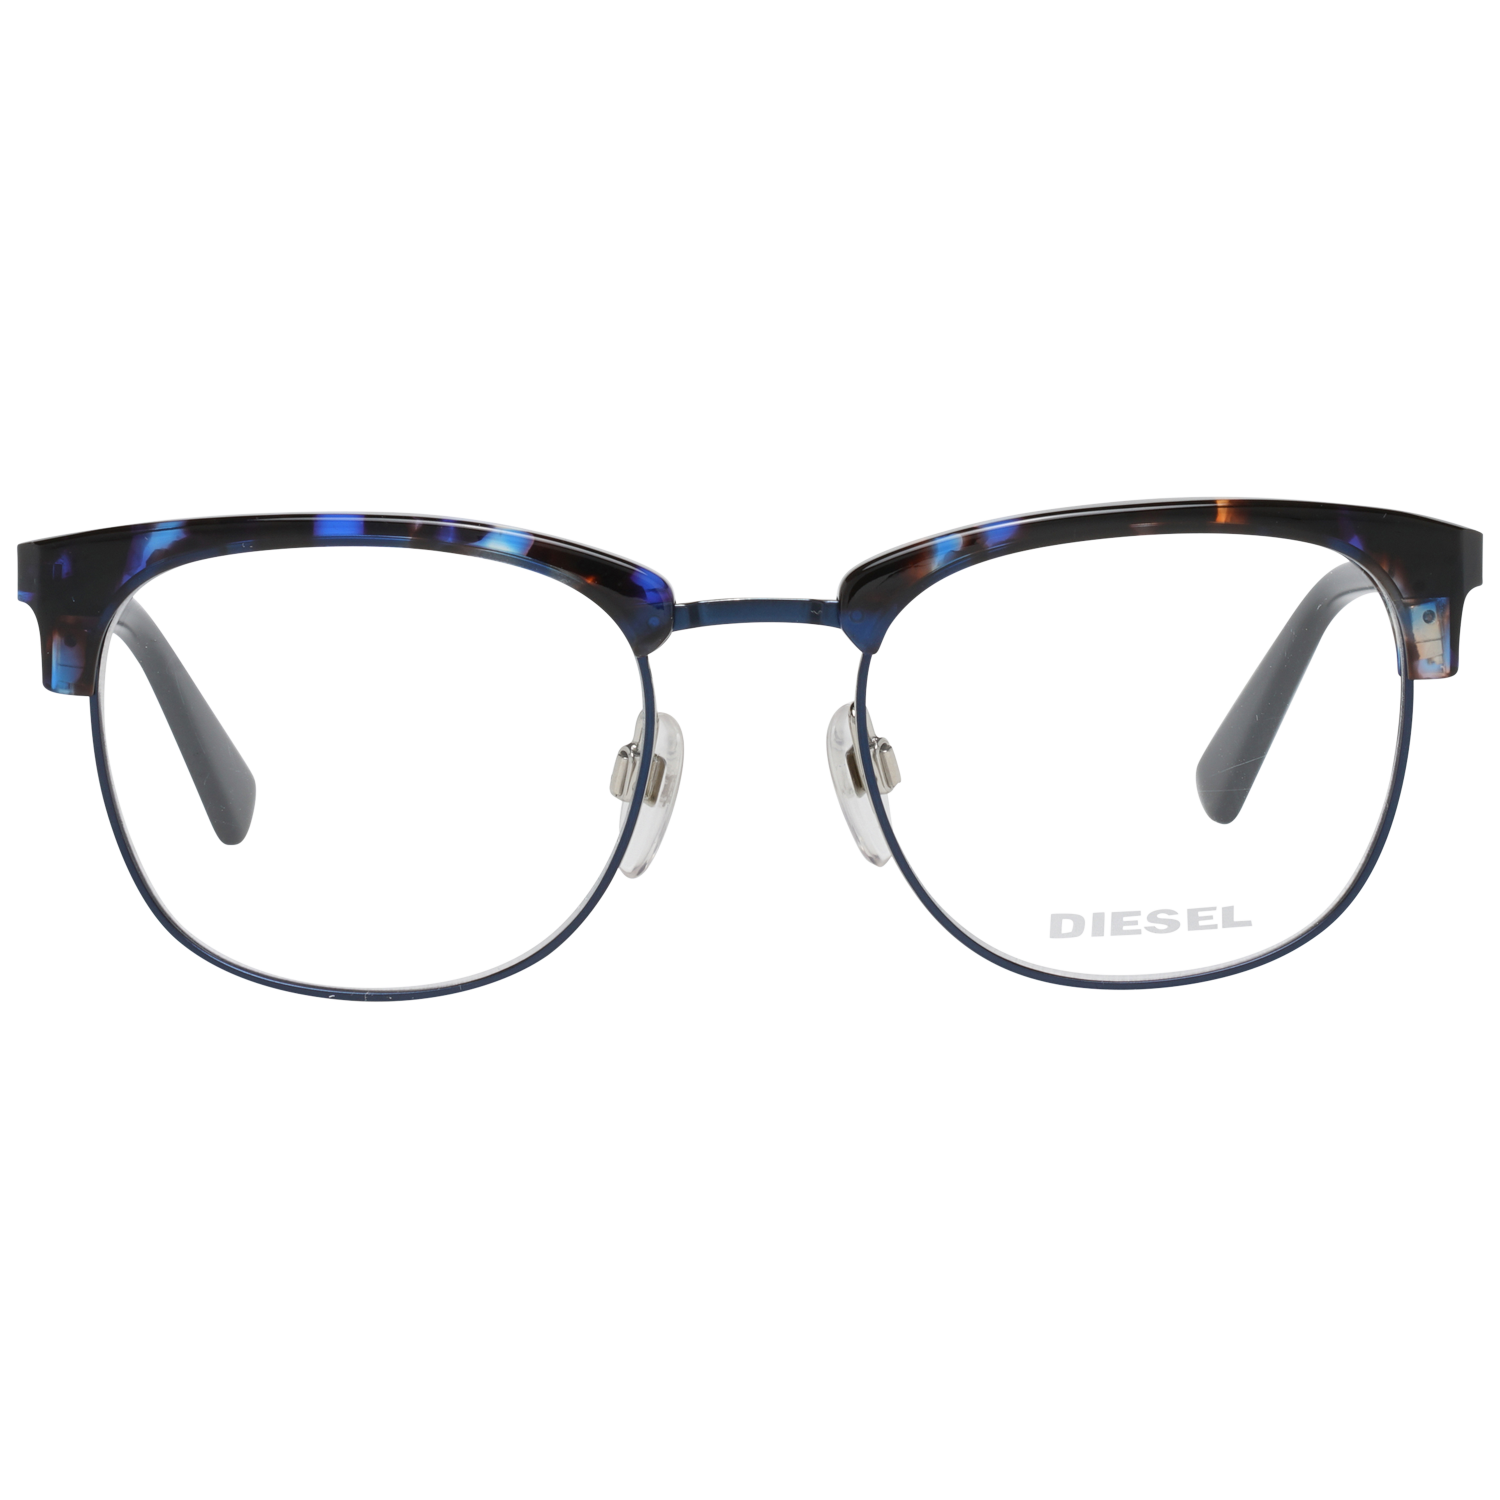 GenderUnisexMain colorBlueFrame colorBlueFrame materialMetal & PlasticSize49-18-145Lenses width49mmLenses heigth38mmBridge length18mmFrame width129mmTemple length145mmShipment includesCase, Cleaning clothStyleFull-RimSpring hingeYes